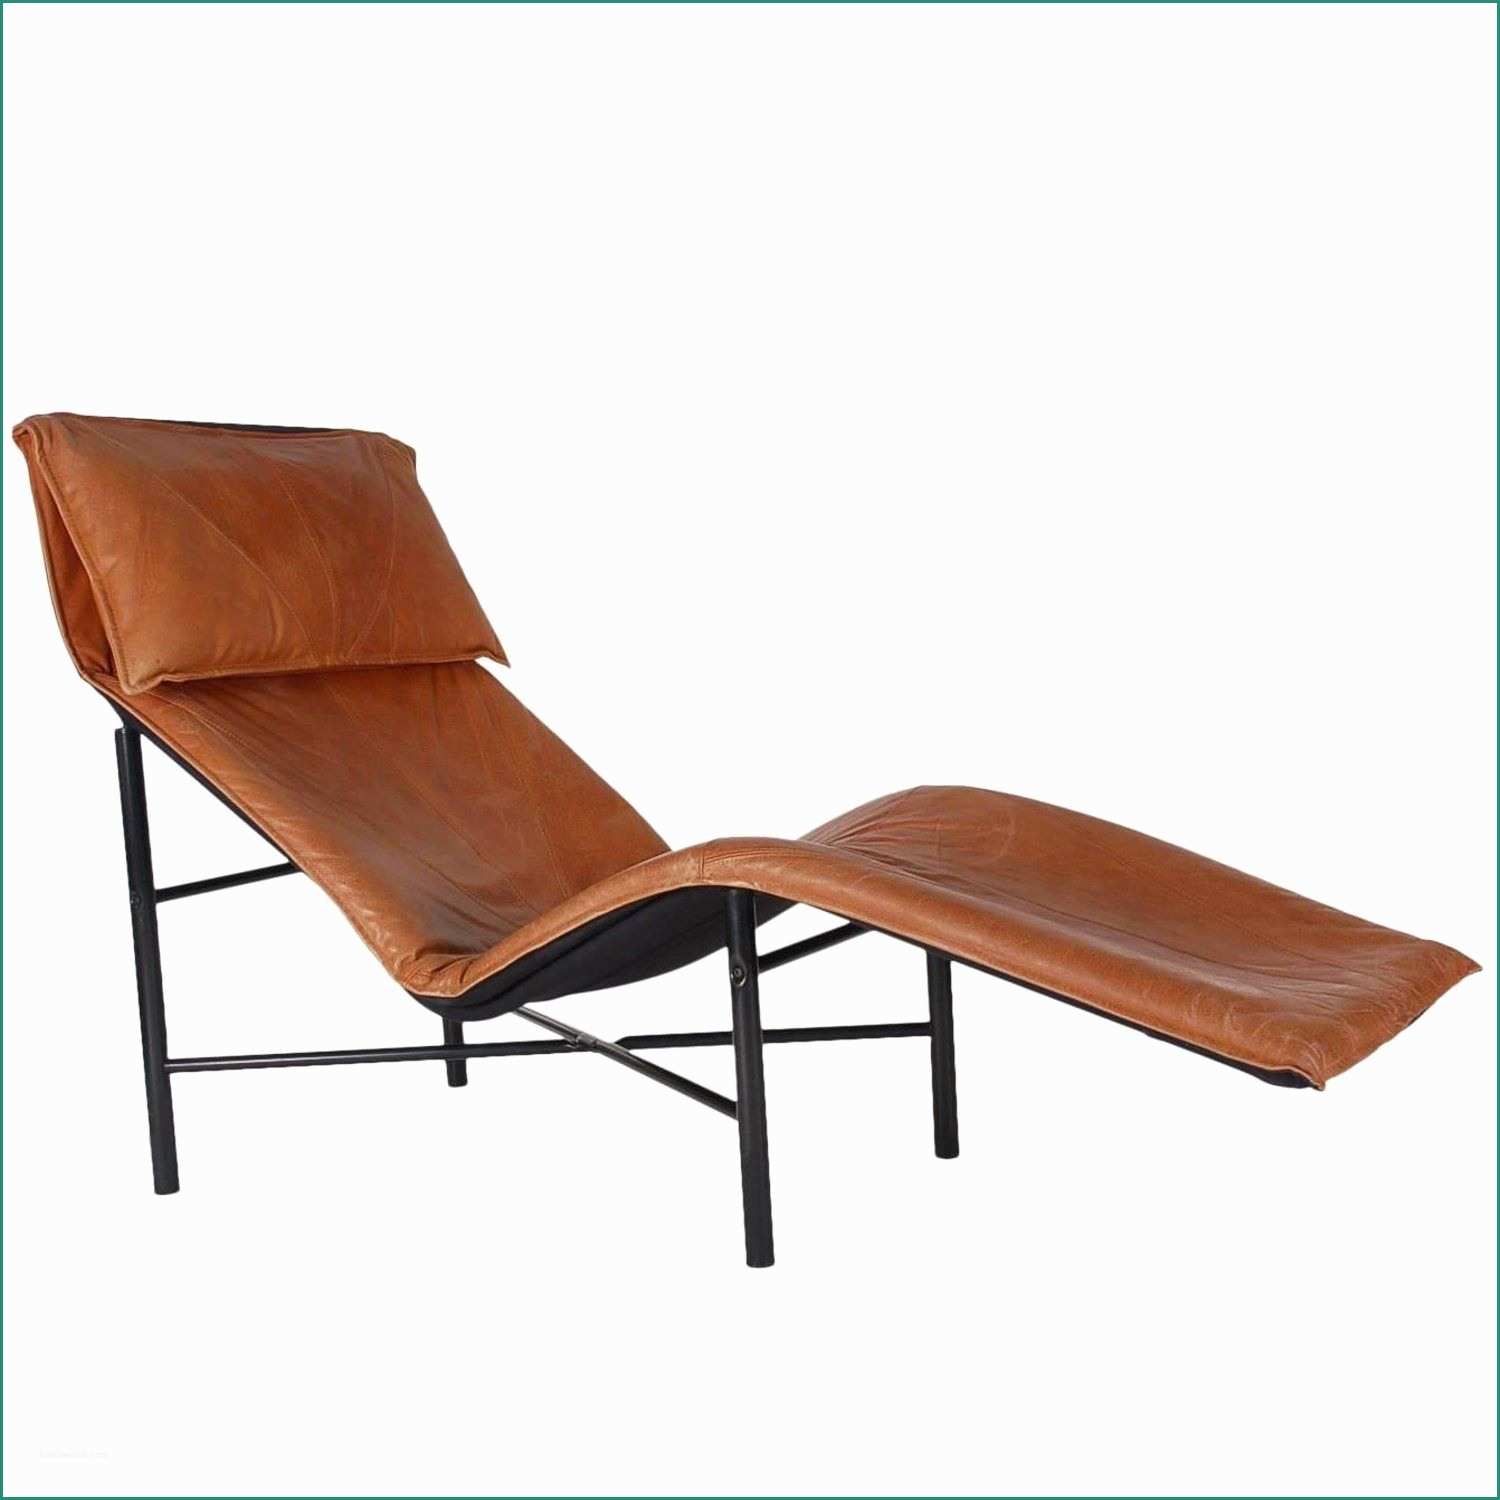 Poltrona Chaise Longue E Midcentury Danish Modern Brown Leather Chaise Lounge Chair by tord